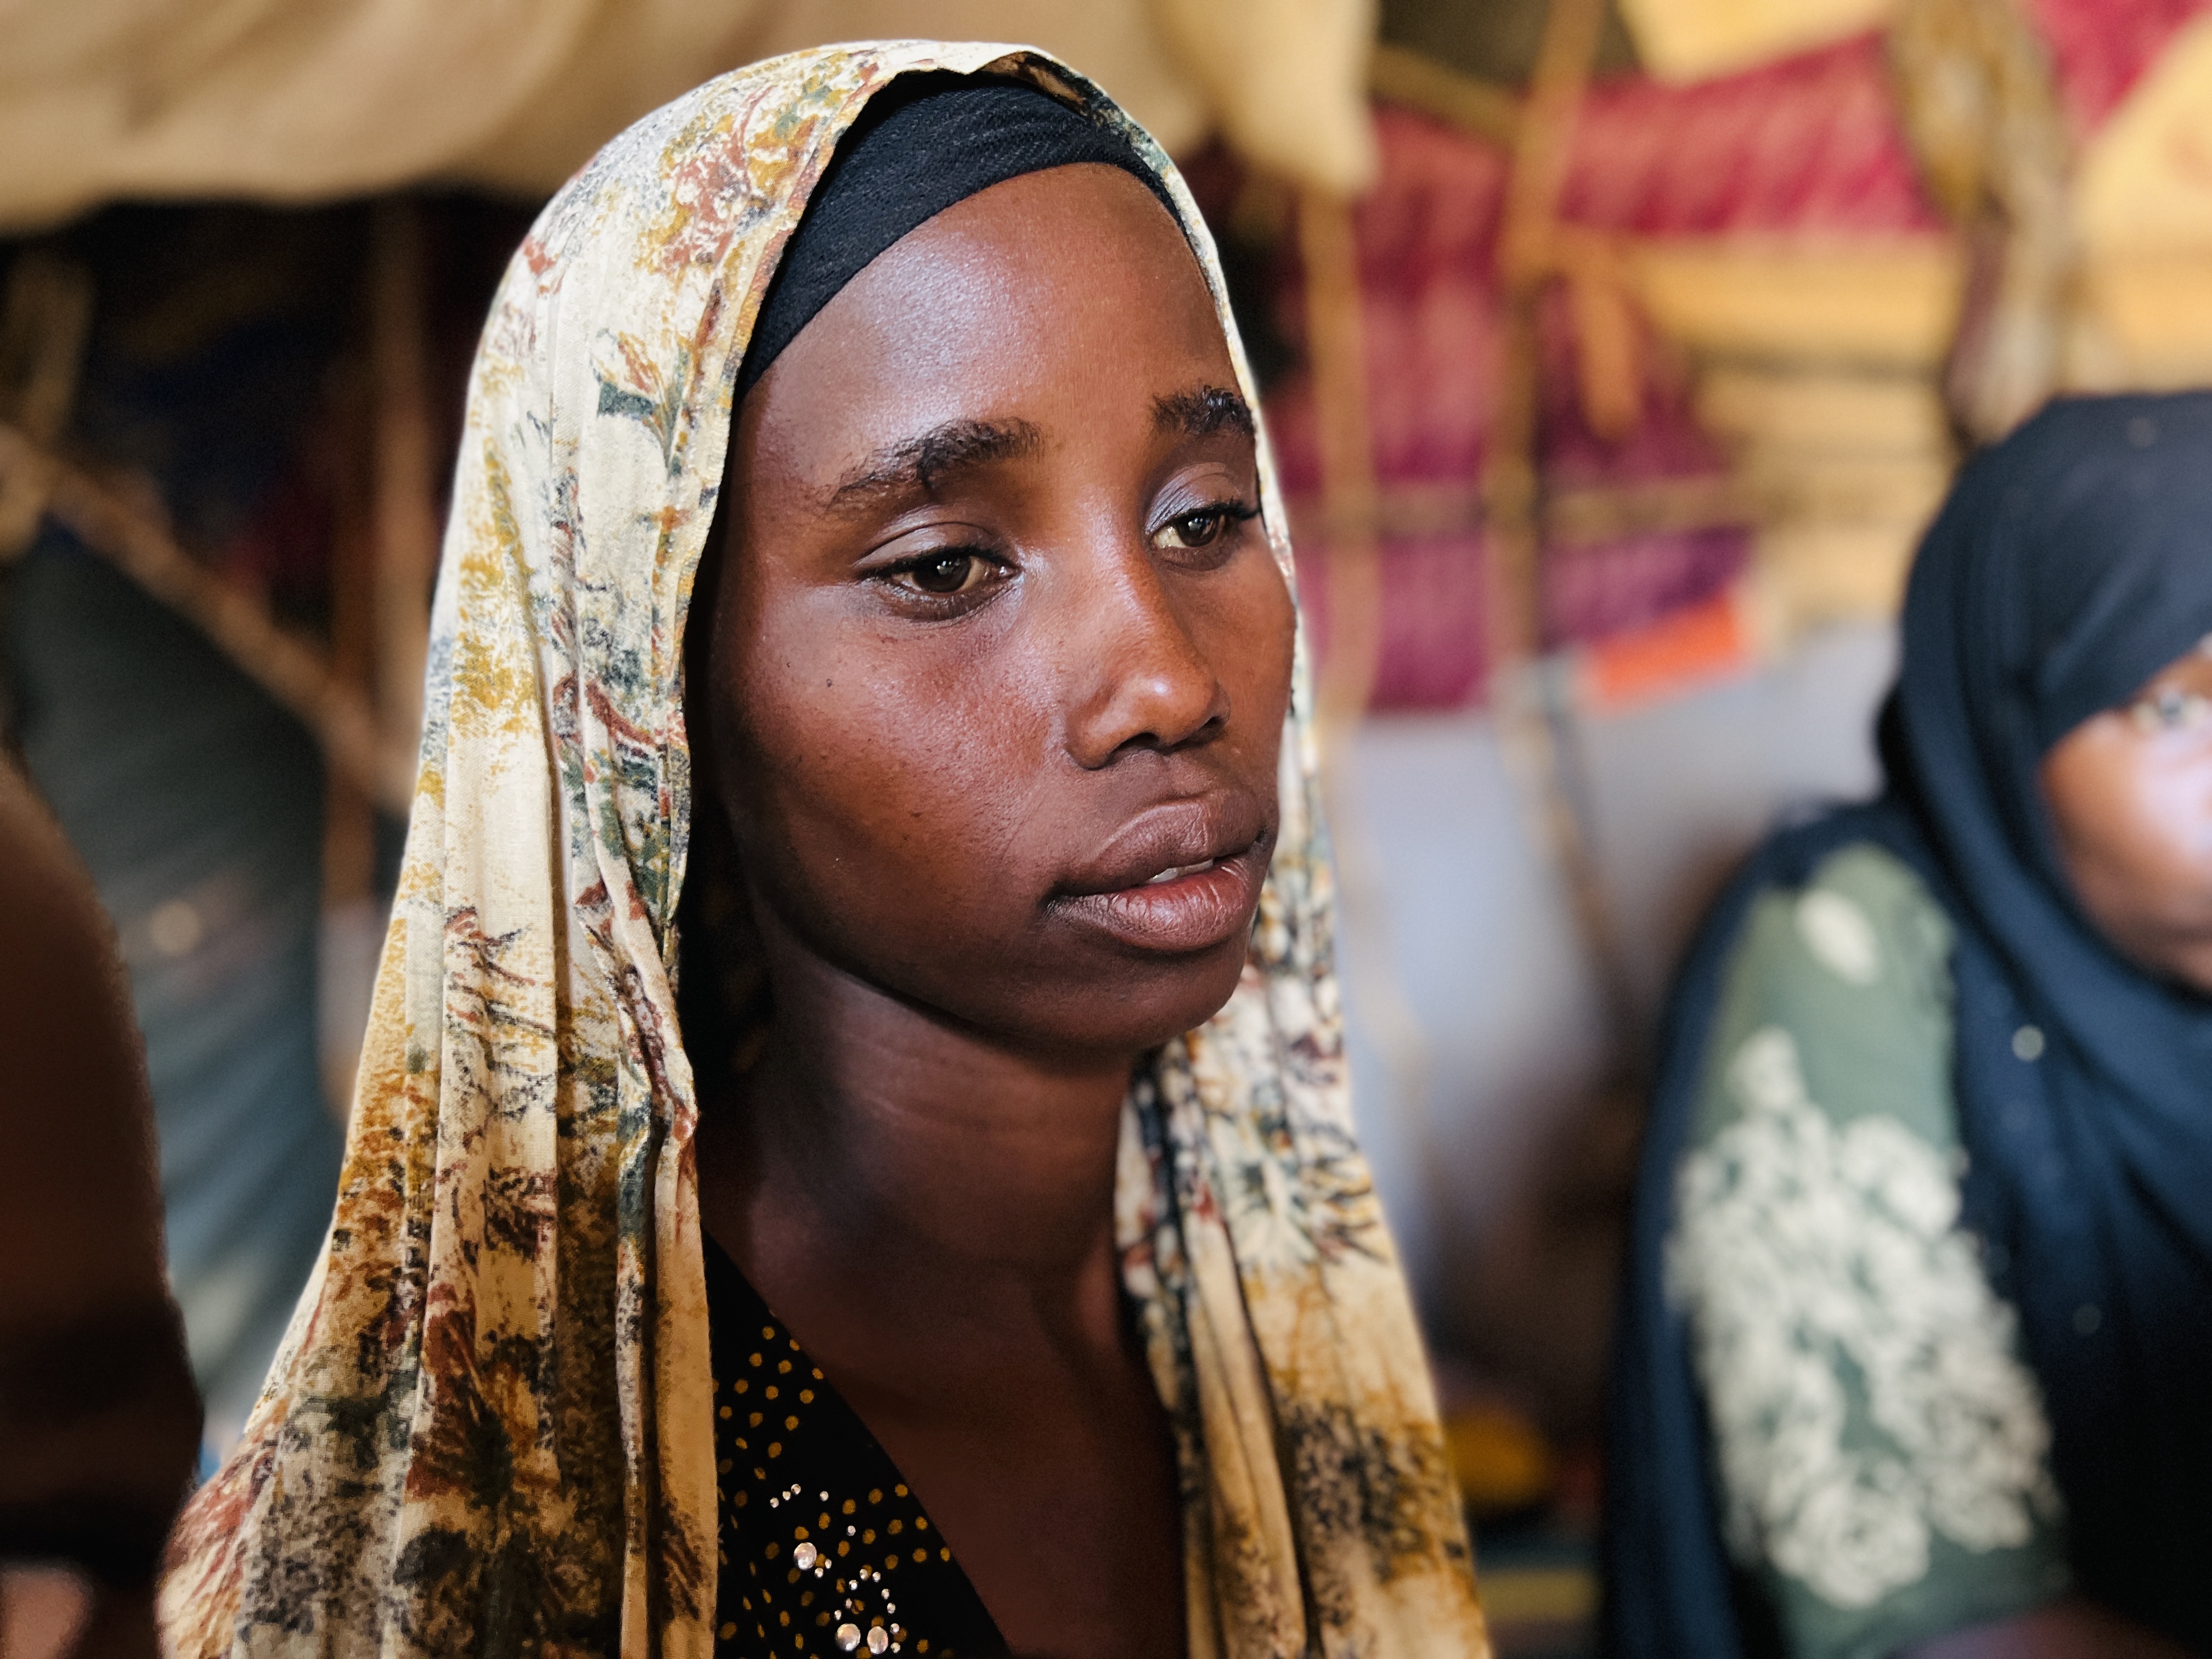 Hawa worries all the time where she will find food for her children